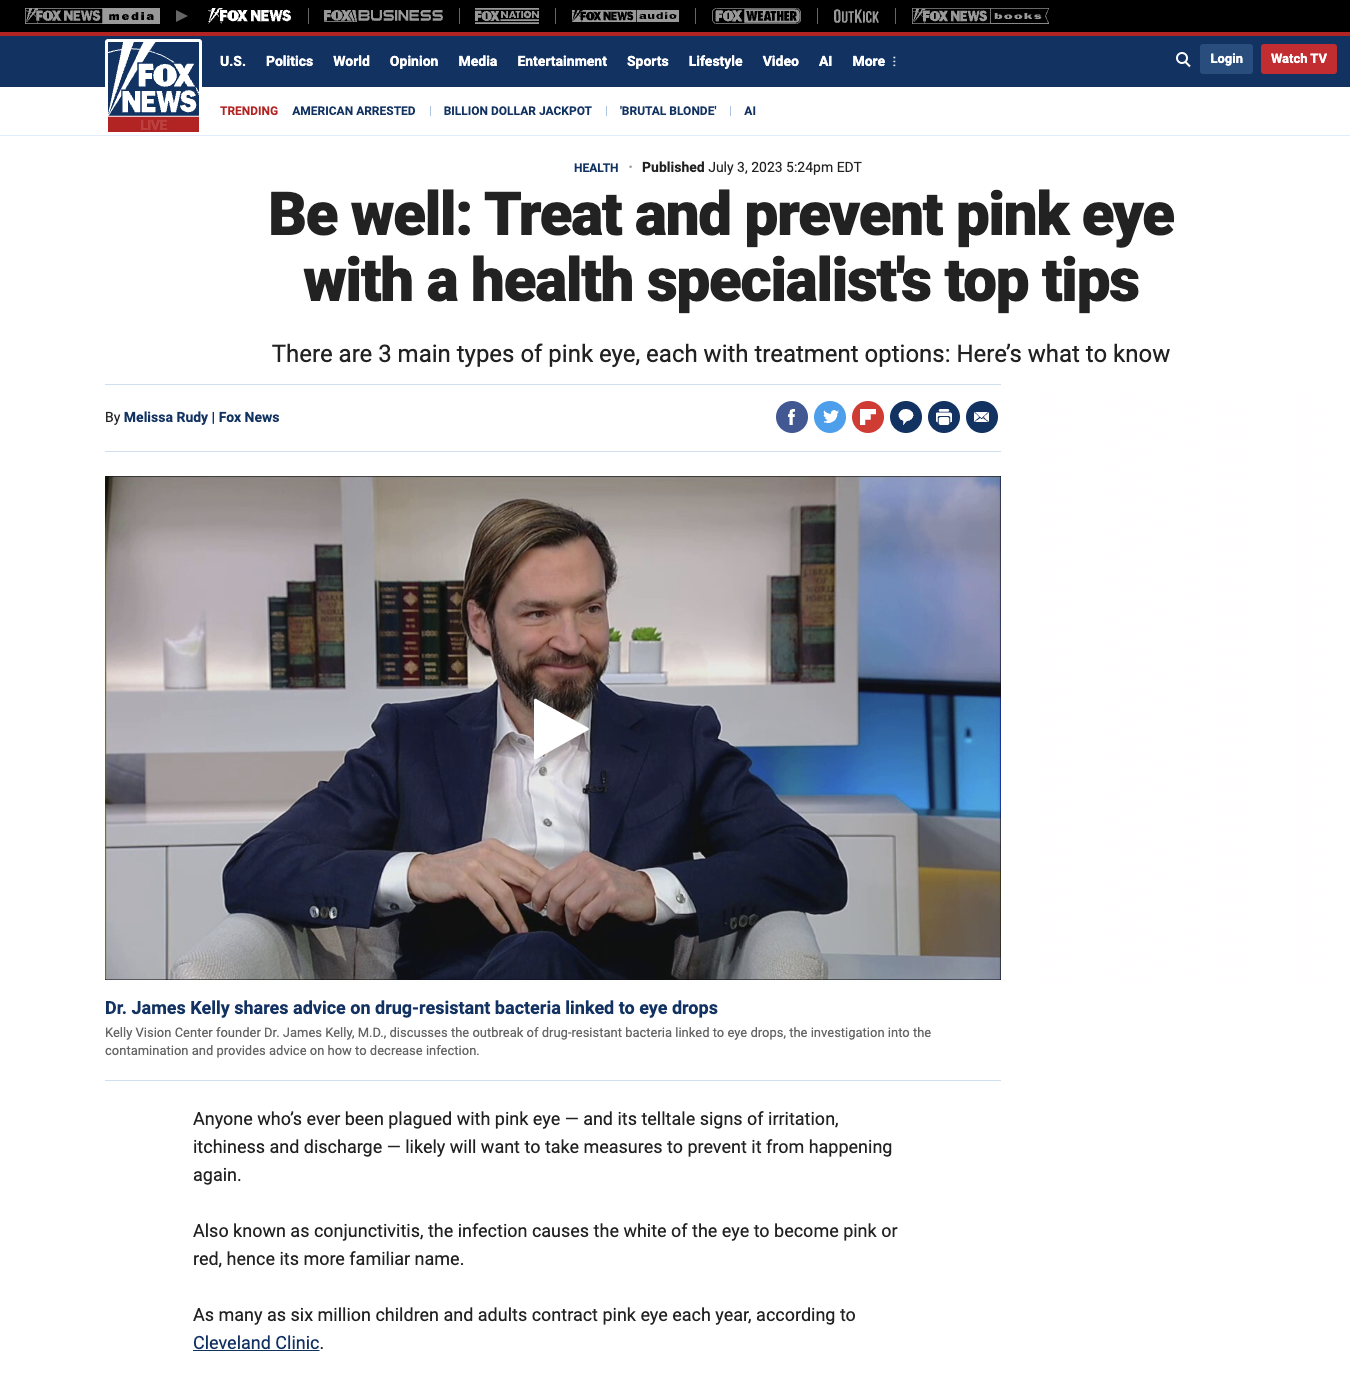 Screenshot of Fox article on pink eye featuring Dr. James Kelly